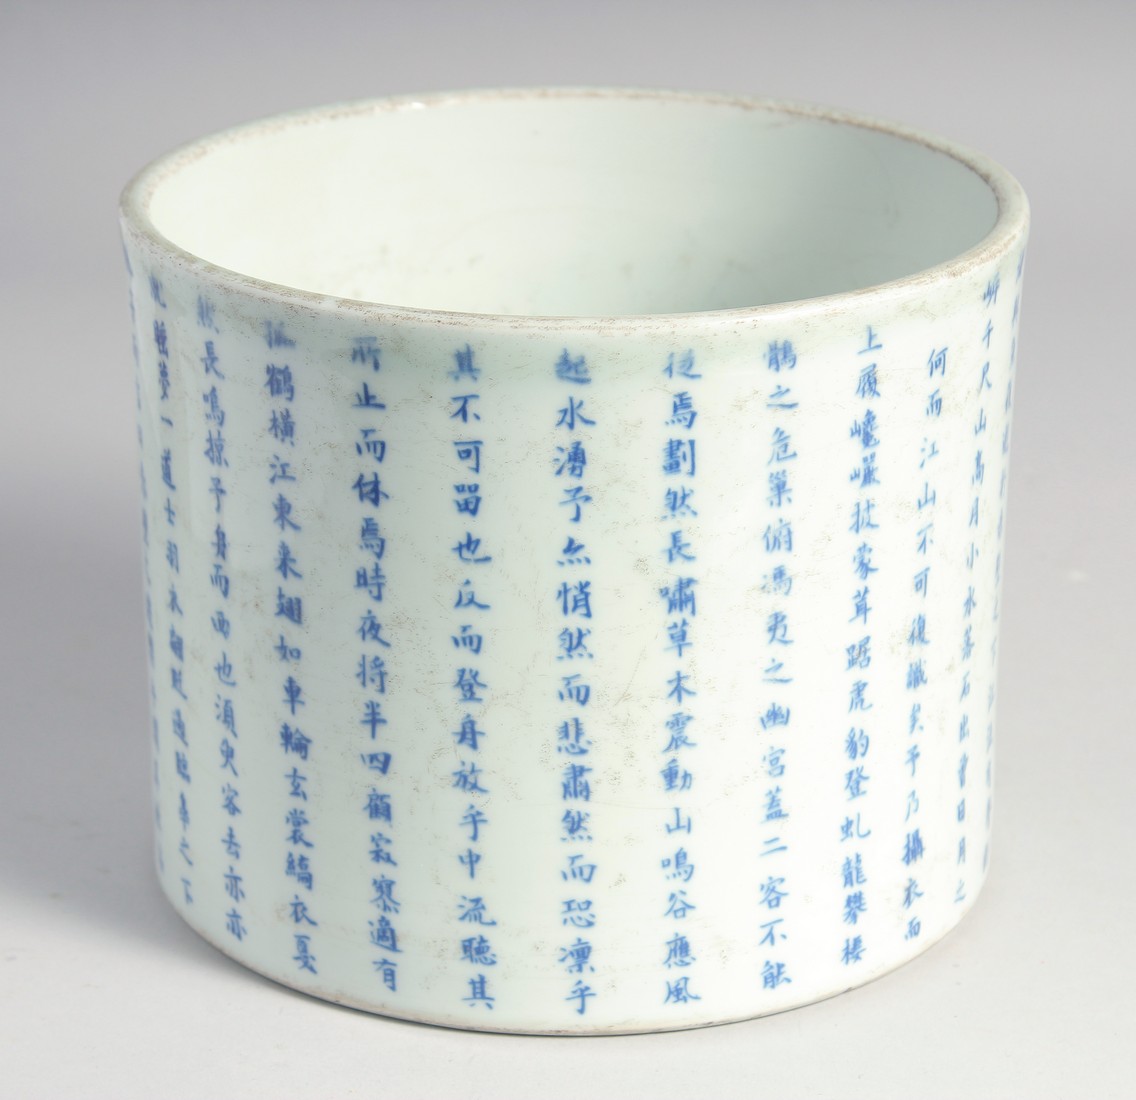 A LARGE CHINESE BLUE AND WHITE PORCELAIN BRUSH POT, the exterior with rows of characters, the base - Image 2 of 7